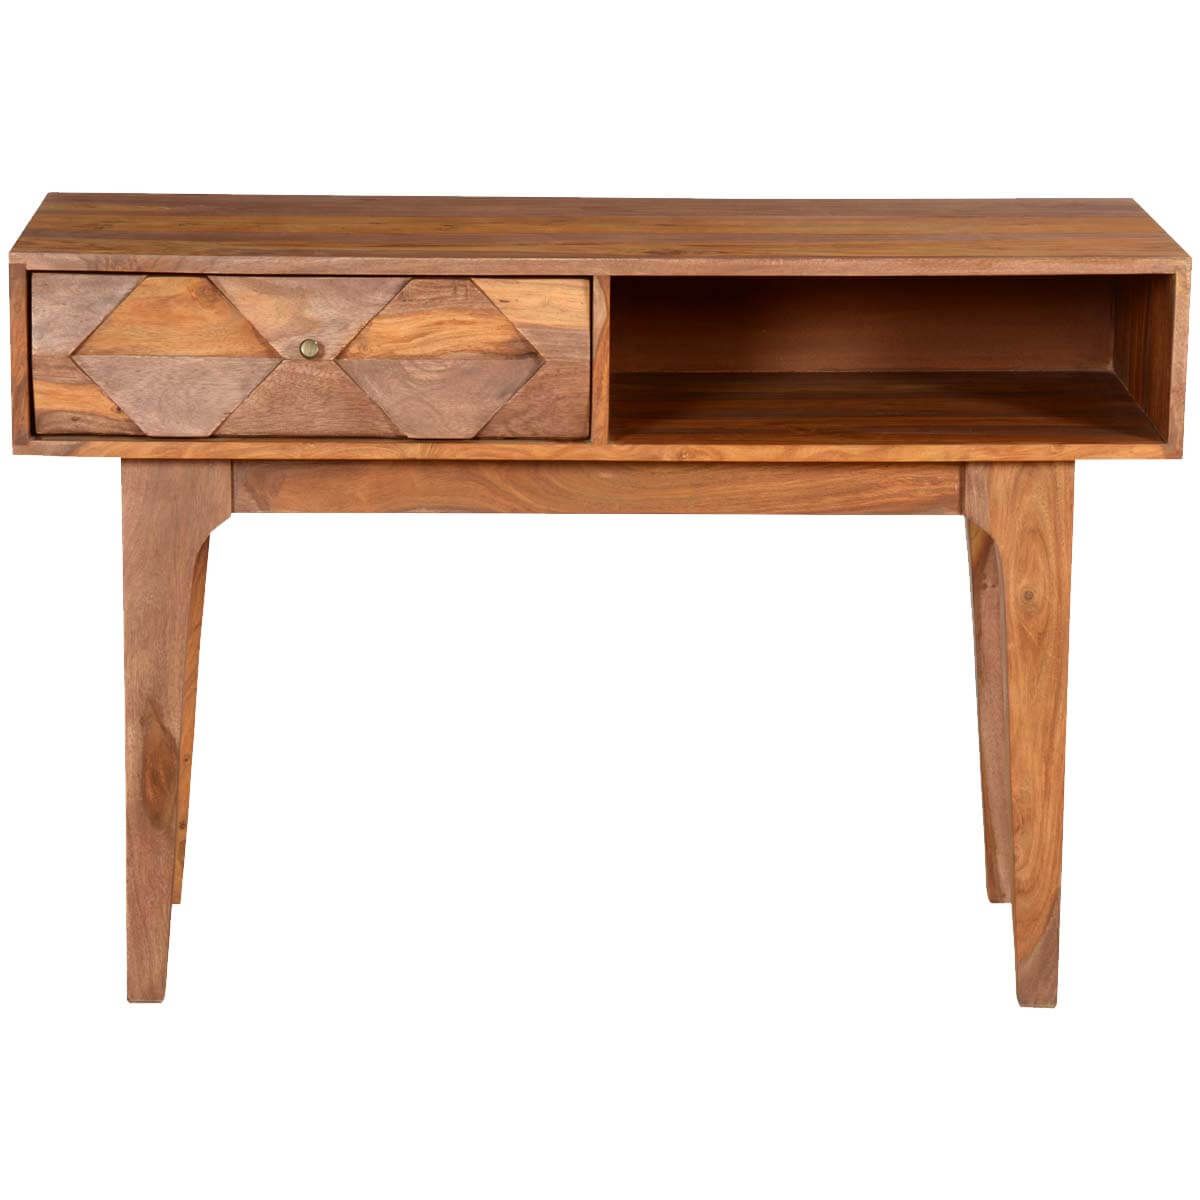 Hand Carved Diamonds Solid Wood Hall Writing Desk In Hand Rubbed Wood Office Writing Desks (View 3 of 15)